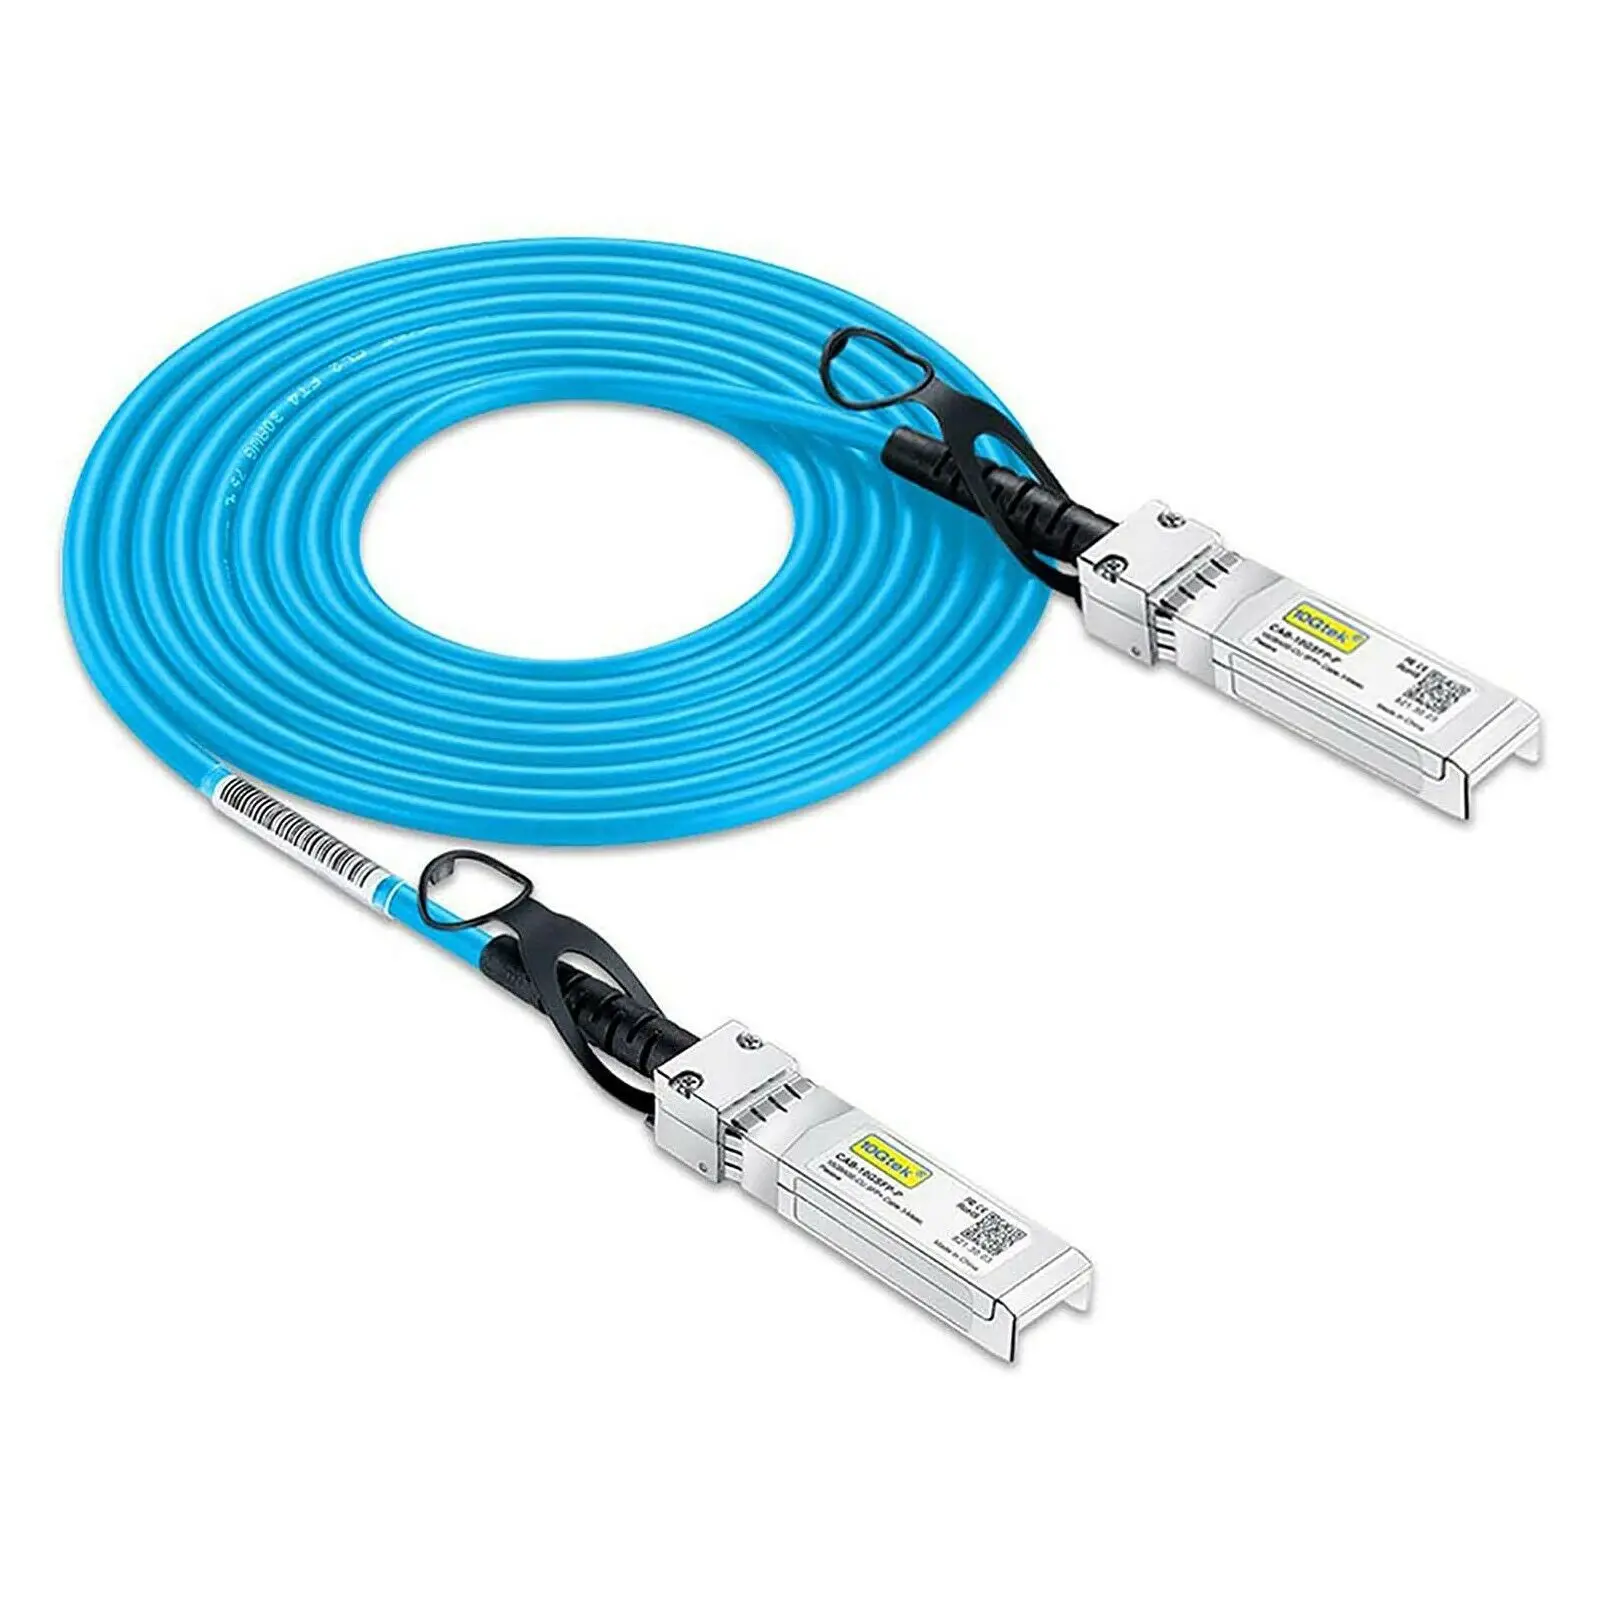 [Blue] Colored 10G SFP+ DAC Cable - Twinax SFP Cable for Cisco SFP-H10GB-CU1M, Arista, Ubiquiti,D-Link, Netgear,1-Meter(3.3ft) dvi m1 da 30 5 pin to vga dual link usb projector cable 1 7m